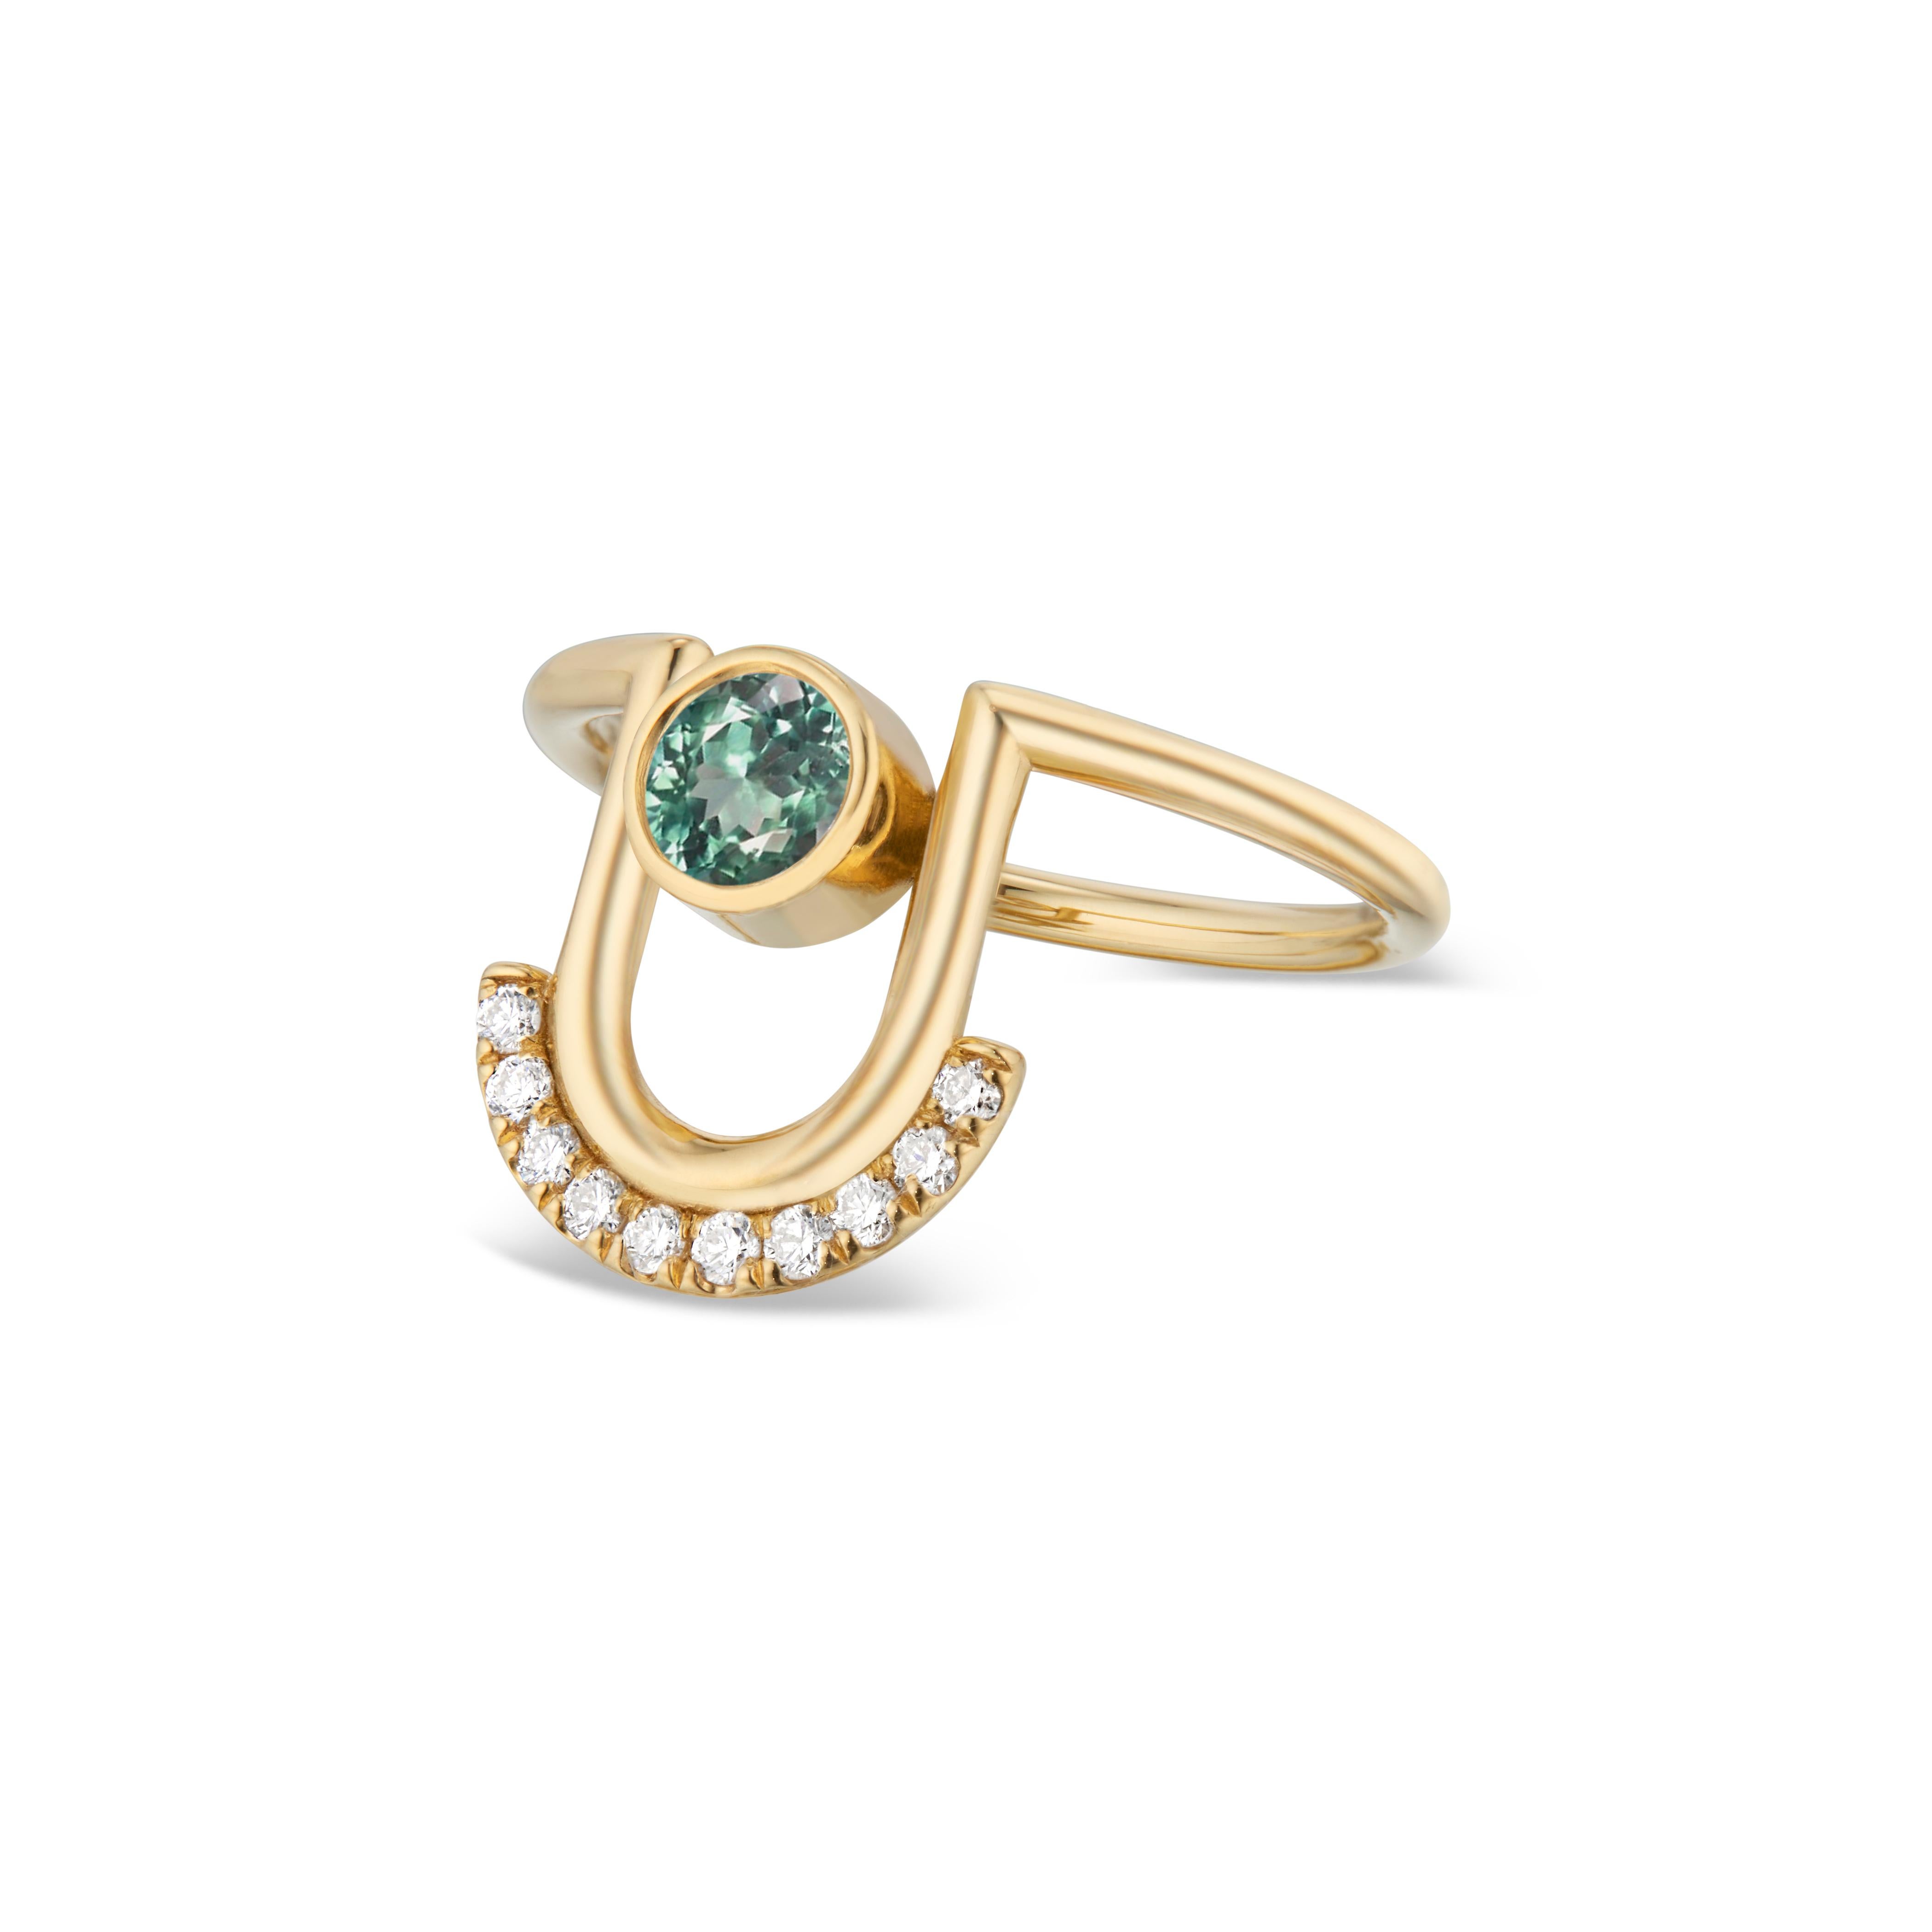 This modern, minimal ring brings together opulent diamonds and opal for a stunning yet delicate effect. The detailed arc reveals a polished row of pave diamonds with a bezel-set green tourmaline in the center.

-Natural diamonds, 0.2 total diamond